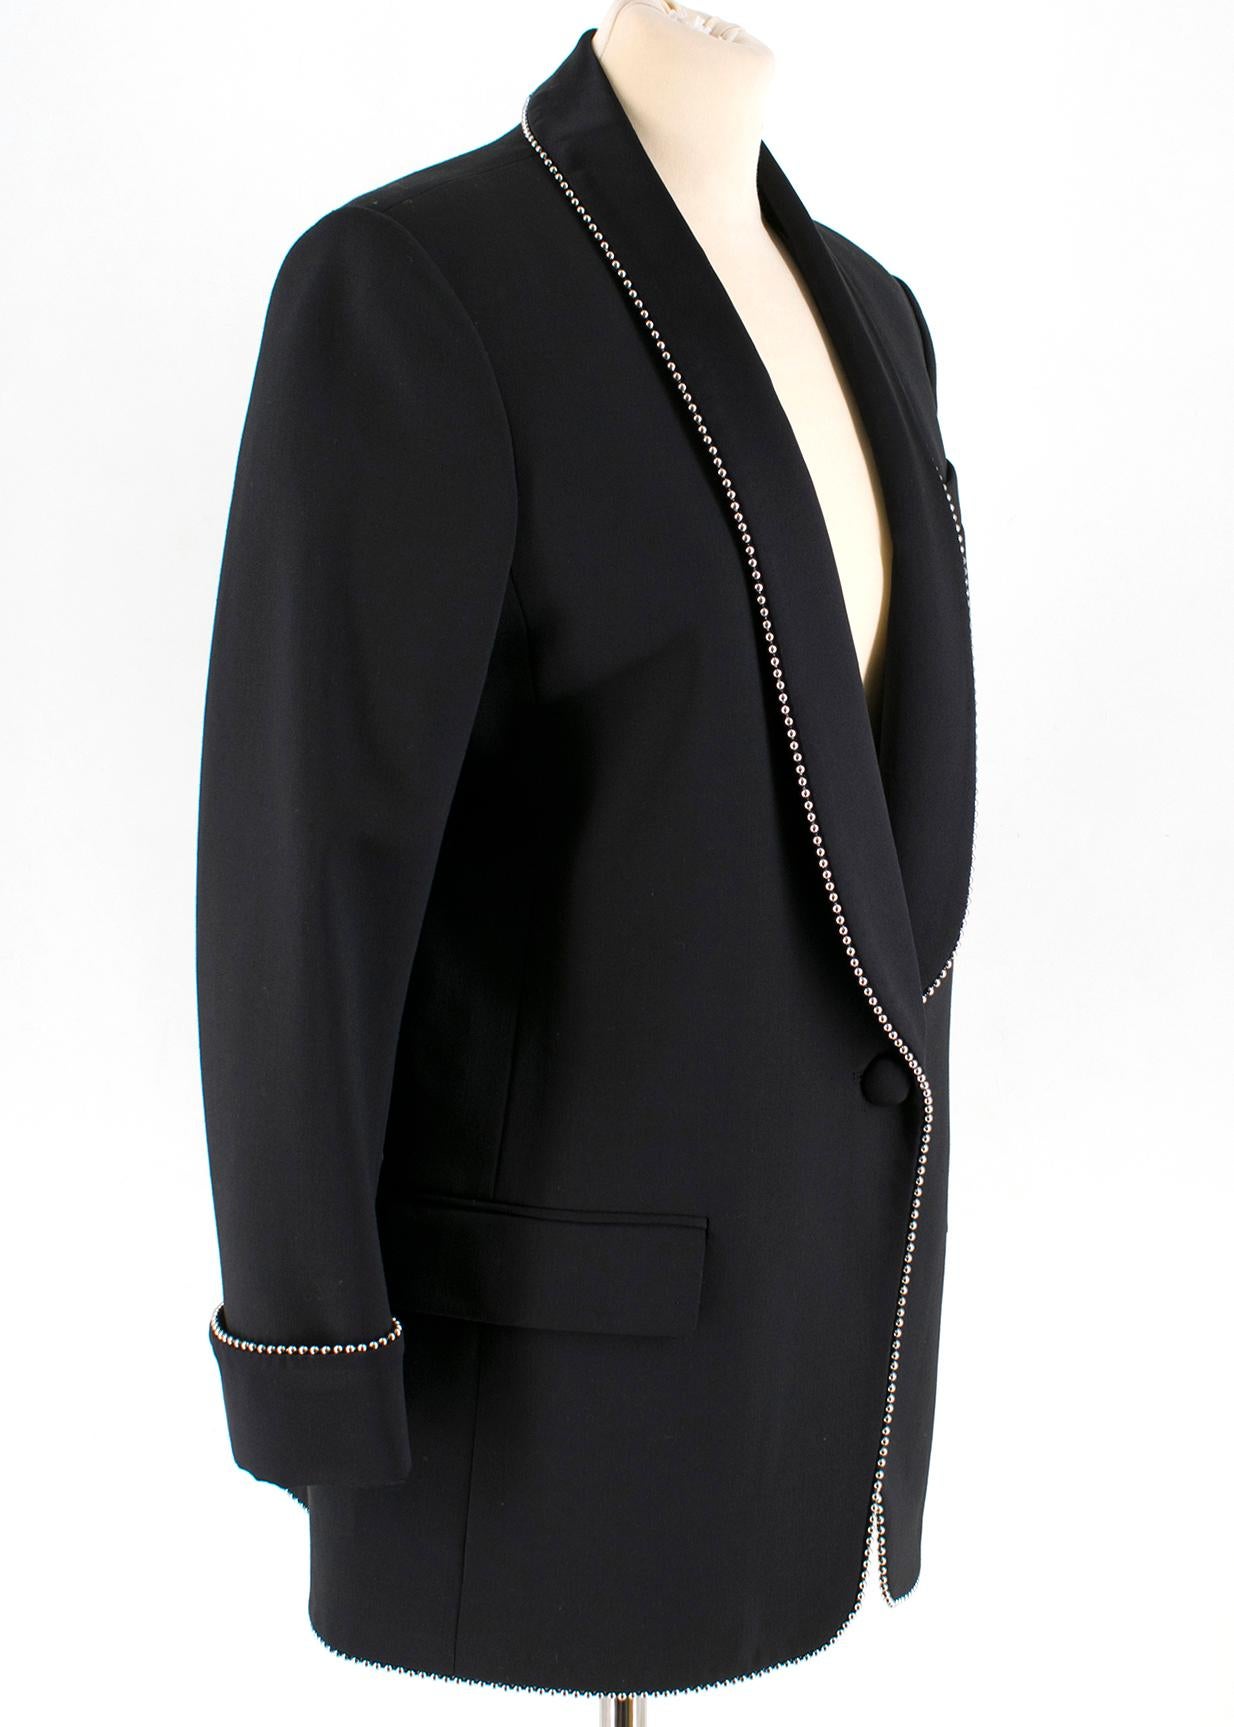 Alexander Wang Bead-Embellished Black Wool-Blend Blazer

- black wool blazer
- silver tone detail embellished trim
- silk lining 
- button fastening 
- lightly padded shoulders

Please note, these items are pre-owned and may show some signs of